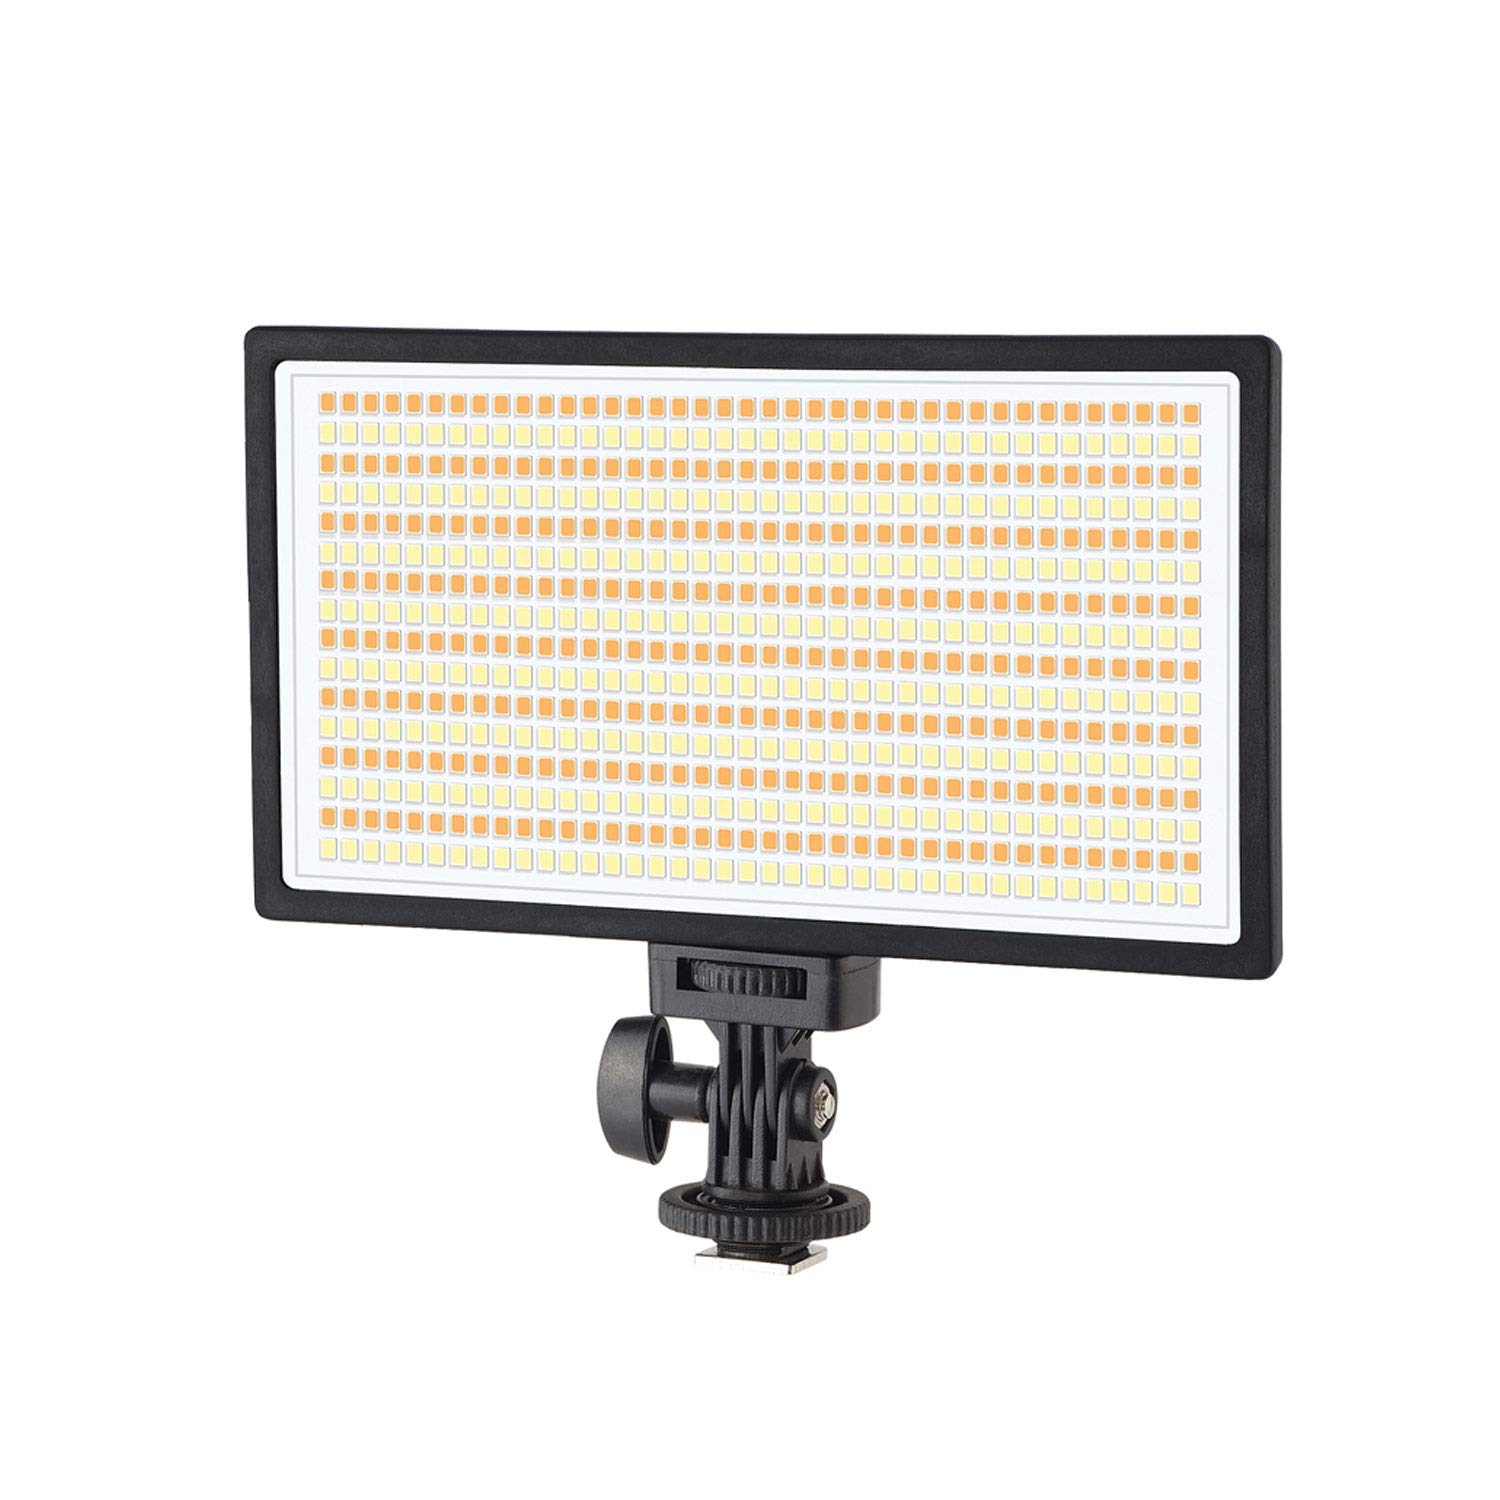 Simpex LED 630 - Ultra Slim - Professional LED Video Light with Battery 770 and Charger